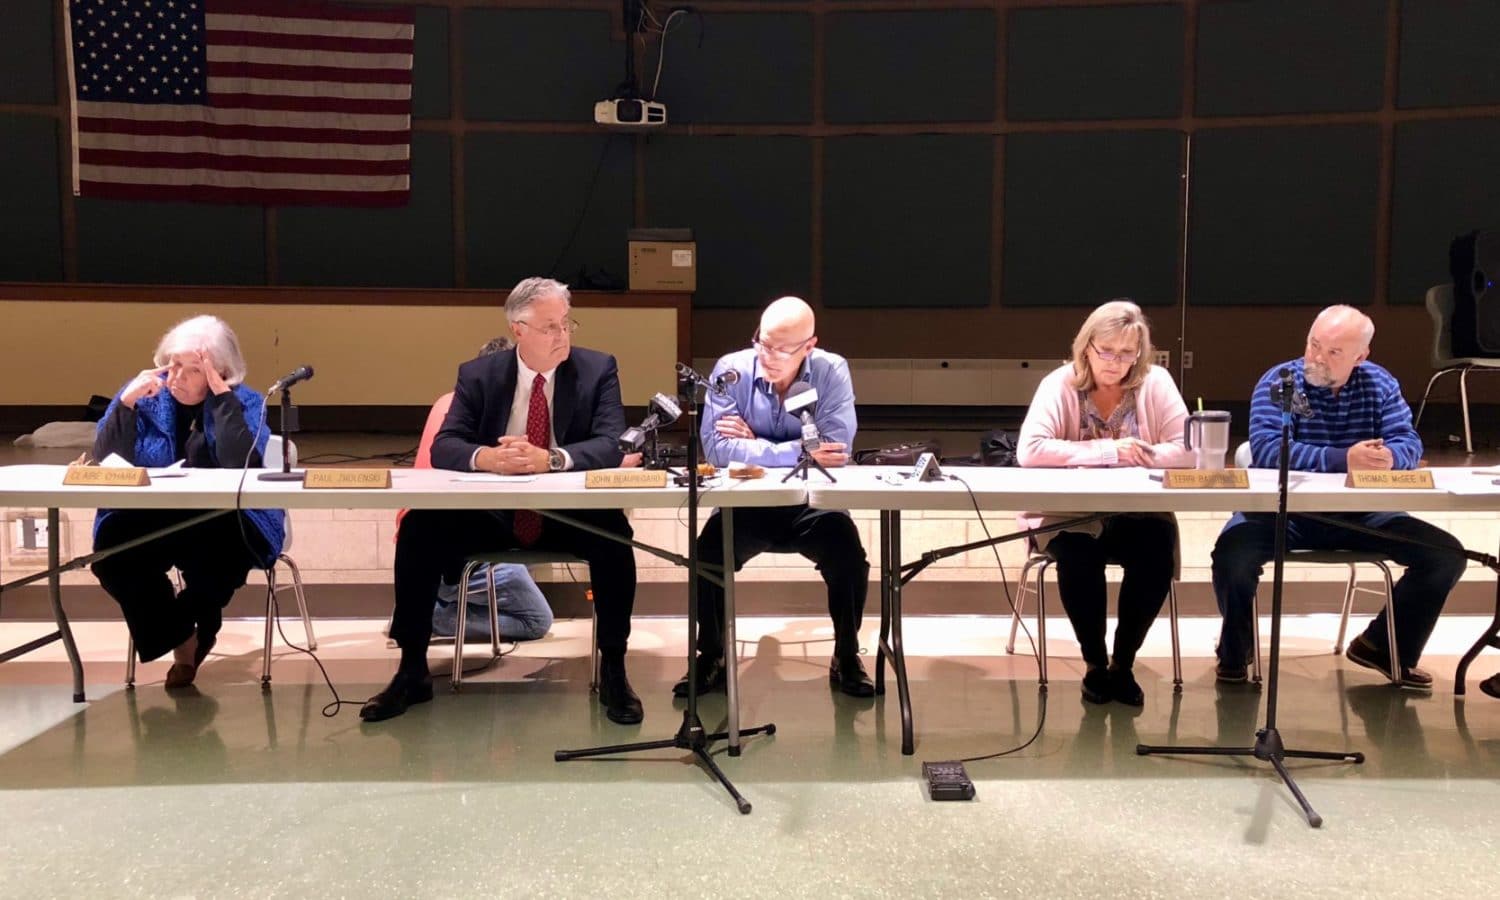 At a contentious meeting, North Smithfield Town Council rescinds anti-Nike resolution